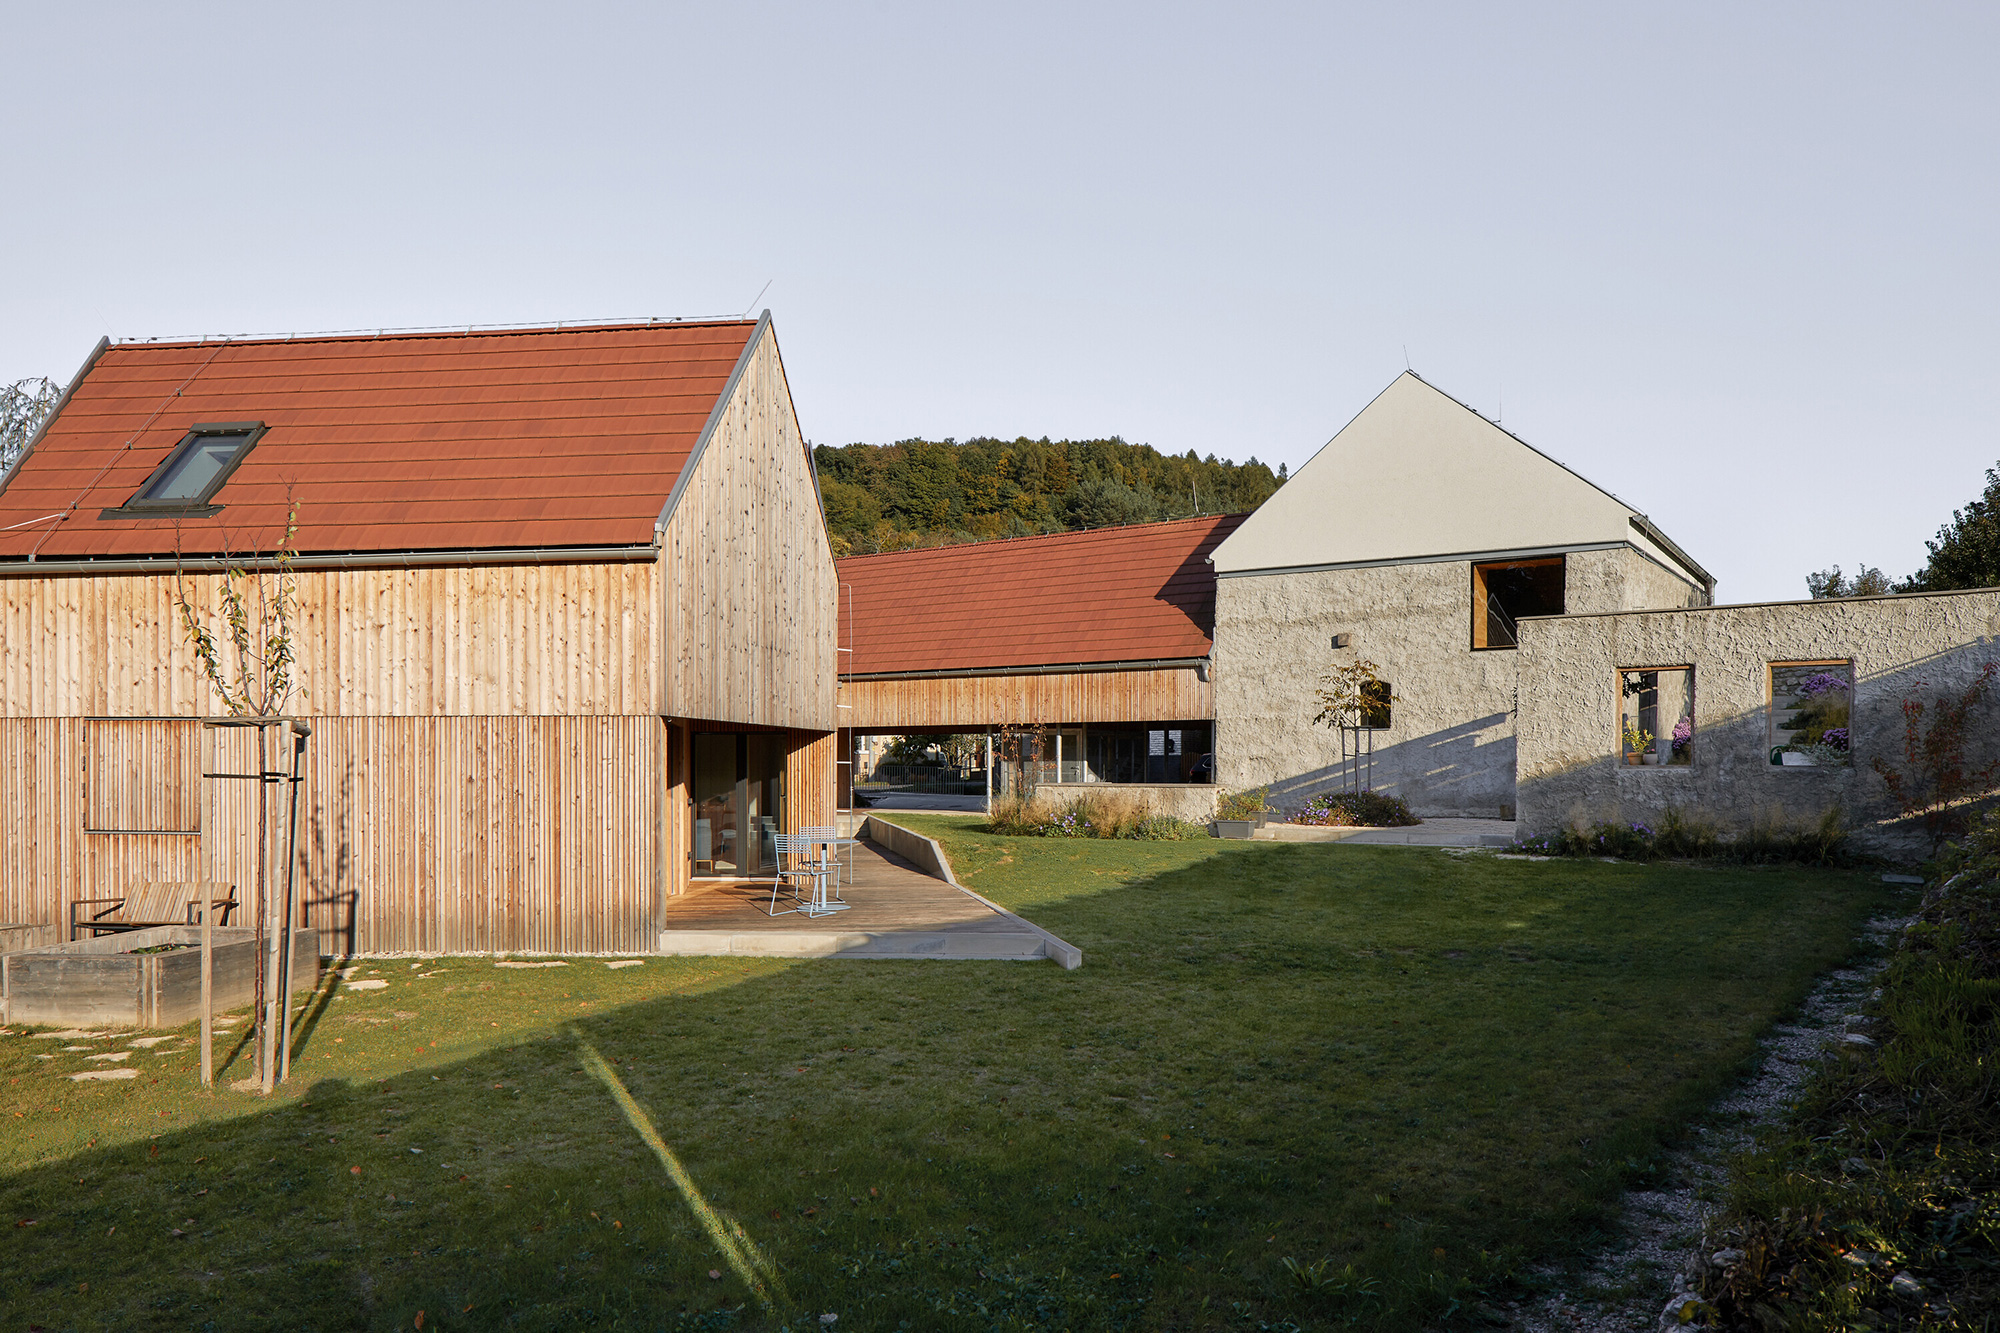 New House with Old Mill - Gessato